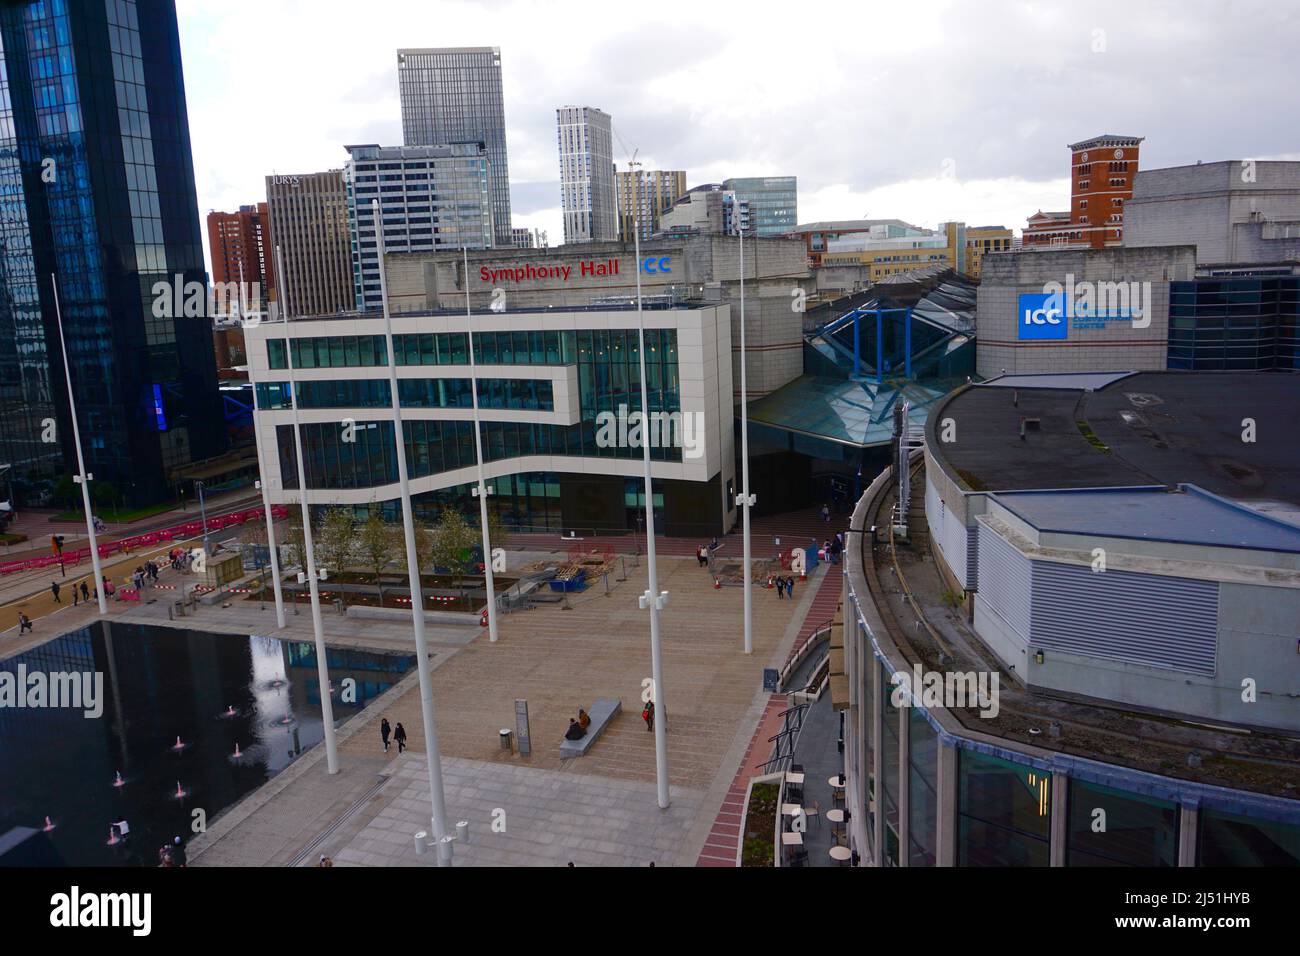 View of Symphony Hall and International Convention Center fro the Birmingham Library, United Kingdom Stock Photo